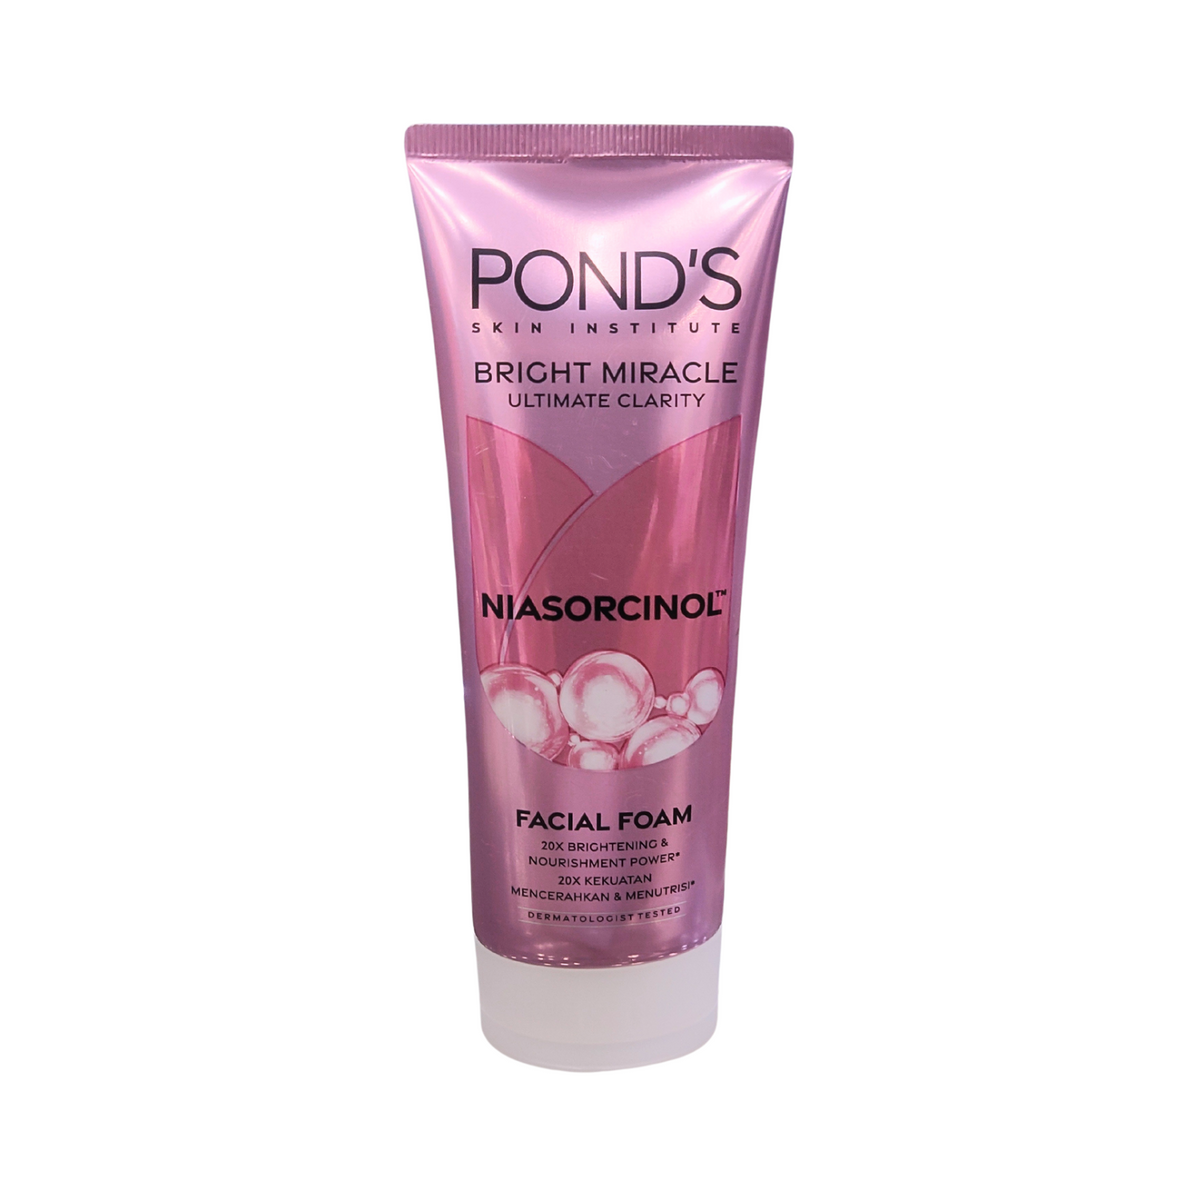 Pond'S Bright Miracle Ultimate Clarity Niasorcinol Facial Foam 100g